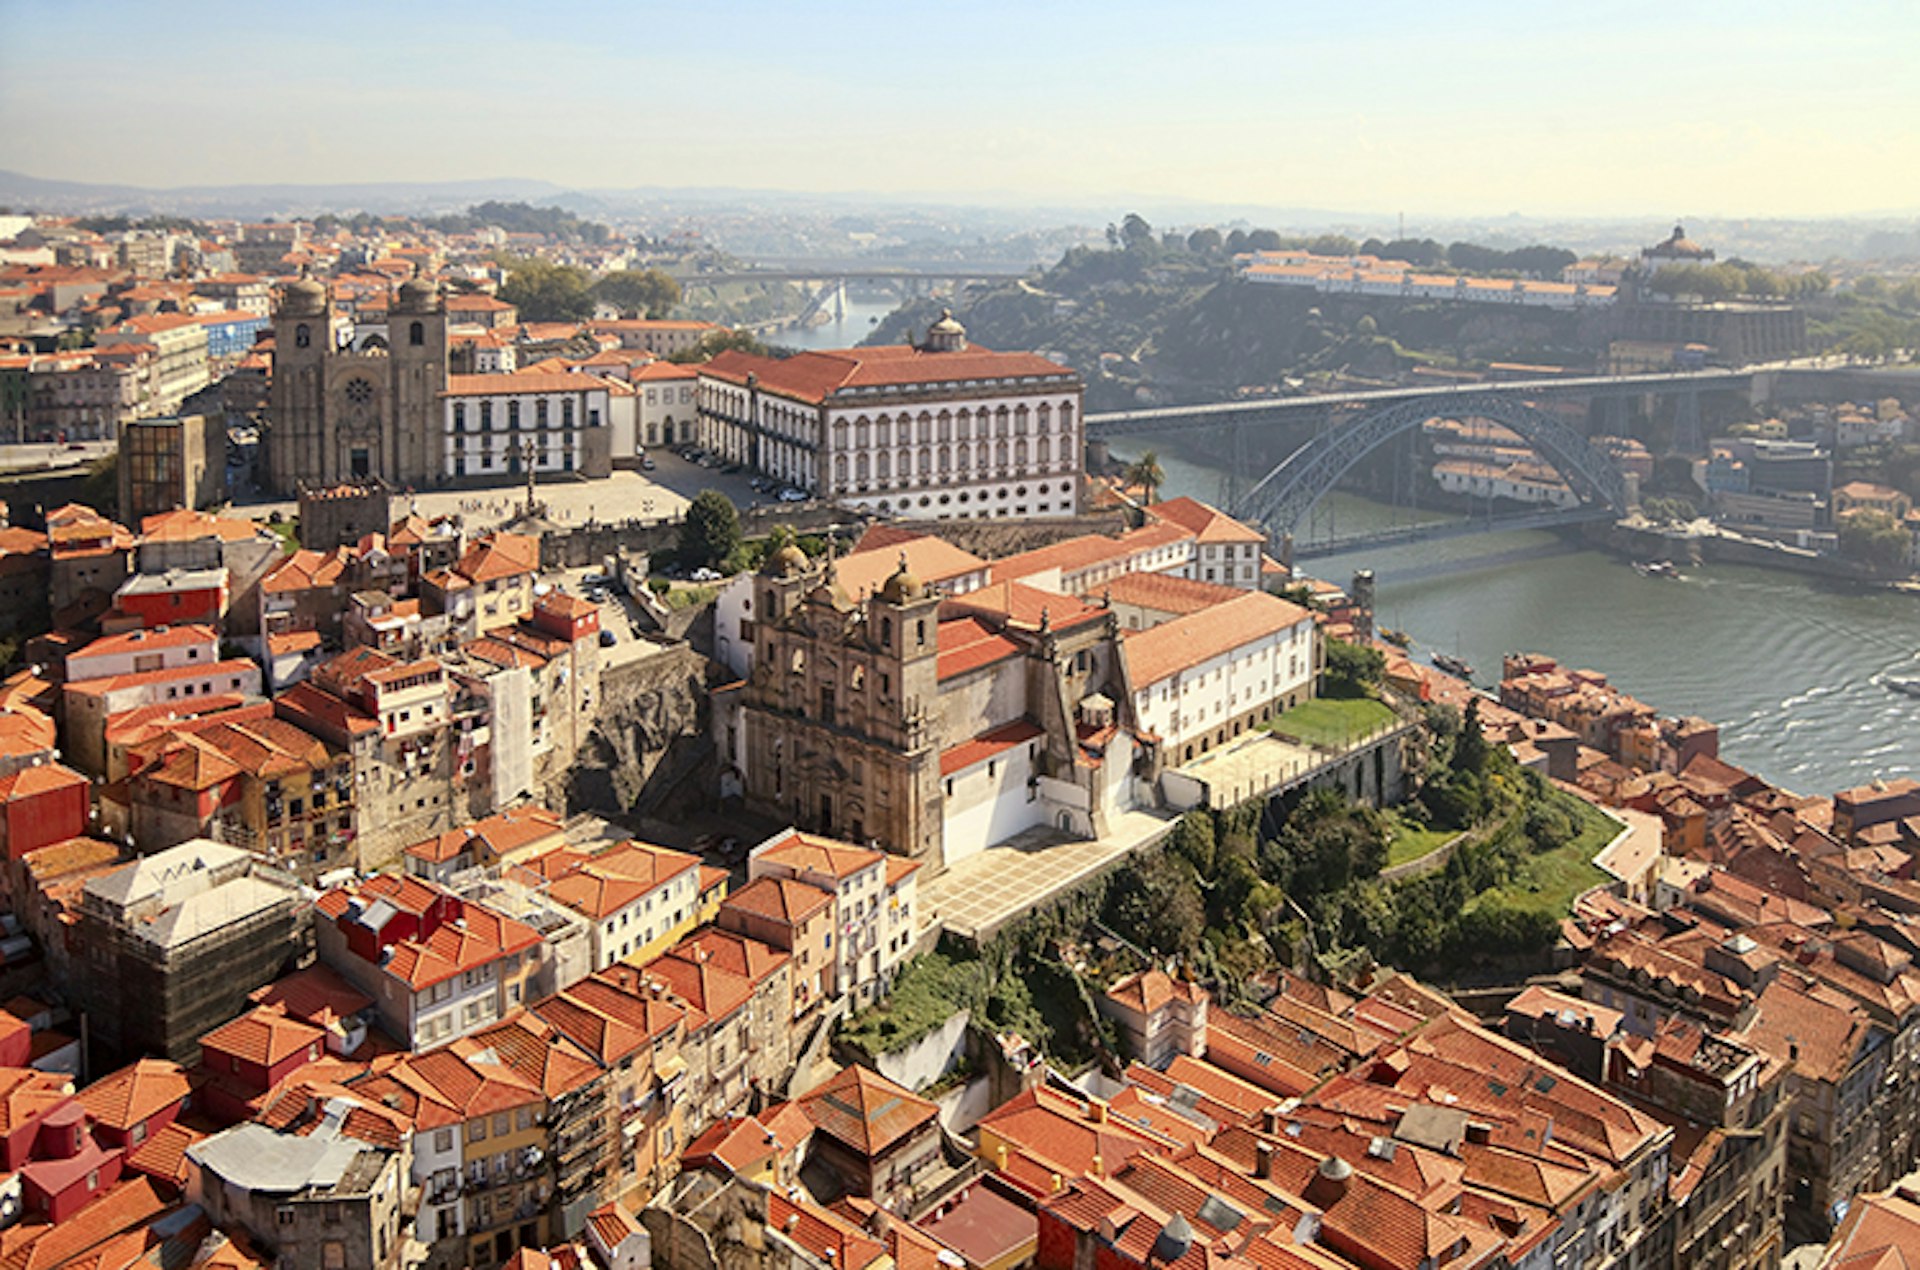 Porto is experiencing a creative rebirth – and it's also a bargain. Image by rusm / E+ / Getty Images